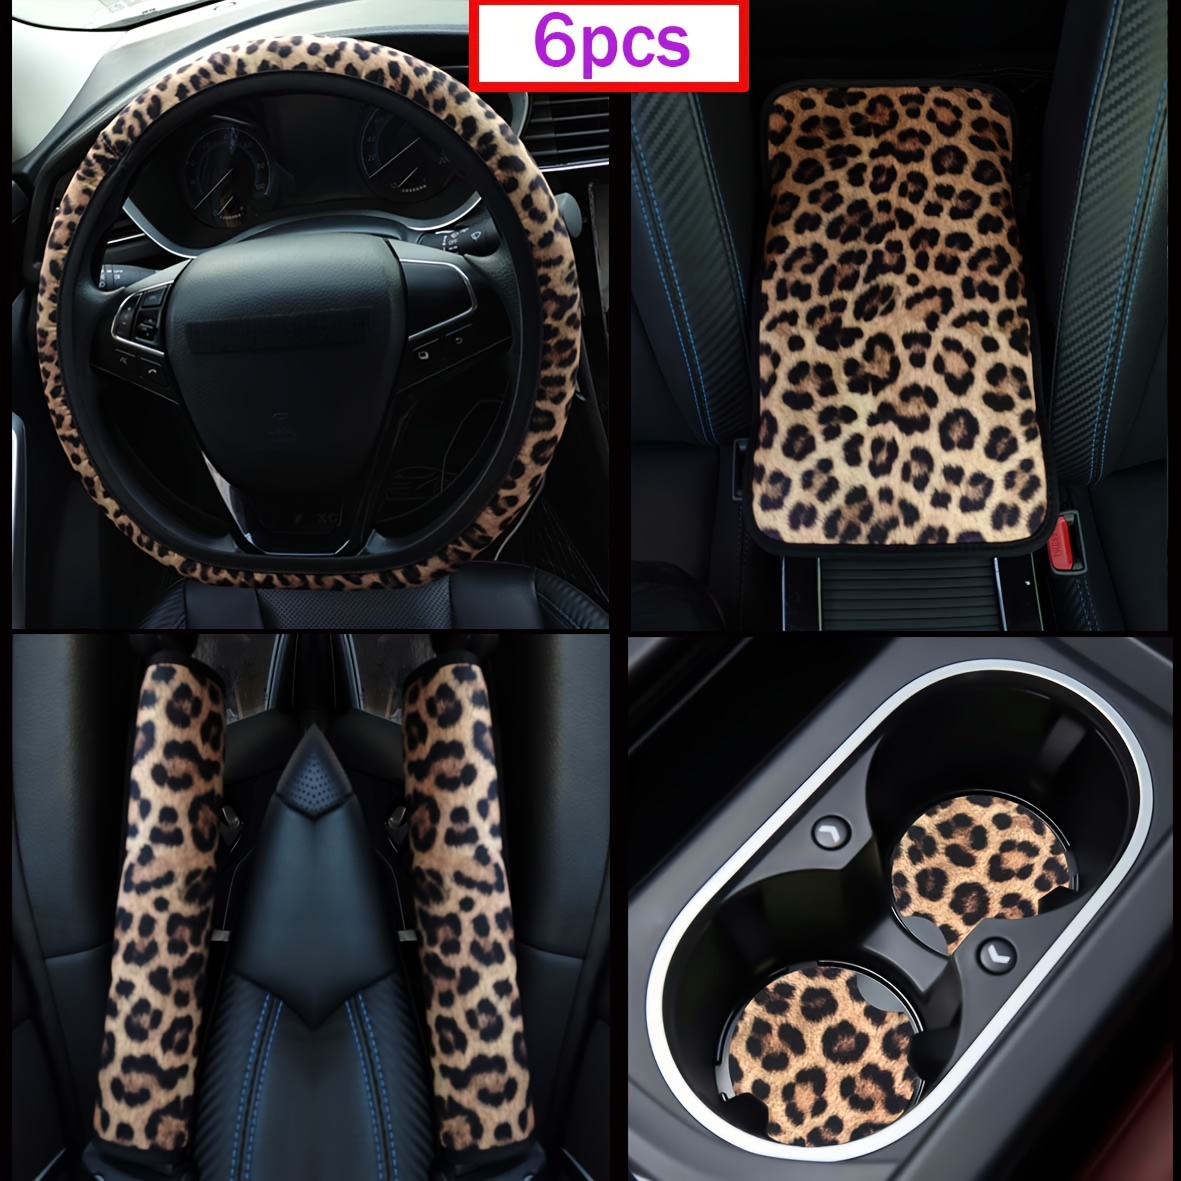 Purple Car Interior Decoration Accessories For Women Girls Silk Steeing  Wheel Cover Seatbelt Shifter Hand Brake Covers Set - Steering Covers -  AliExpress